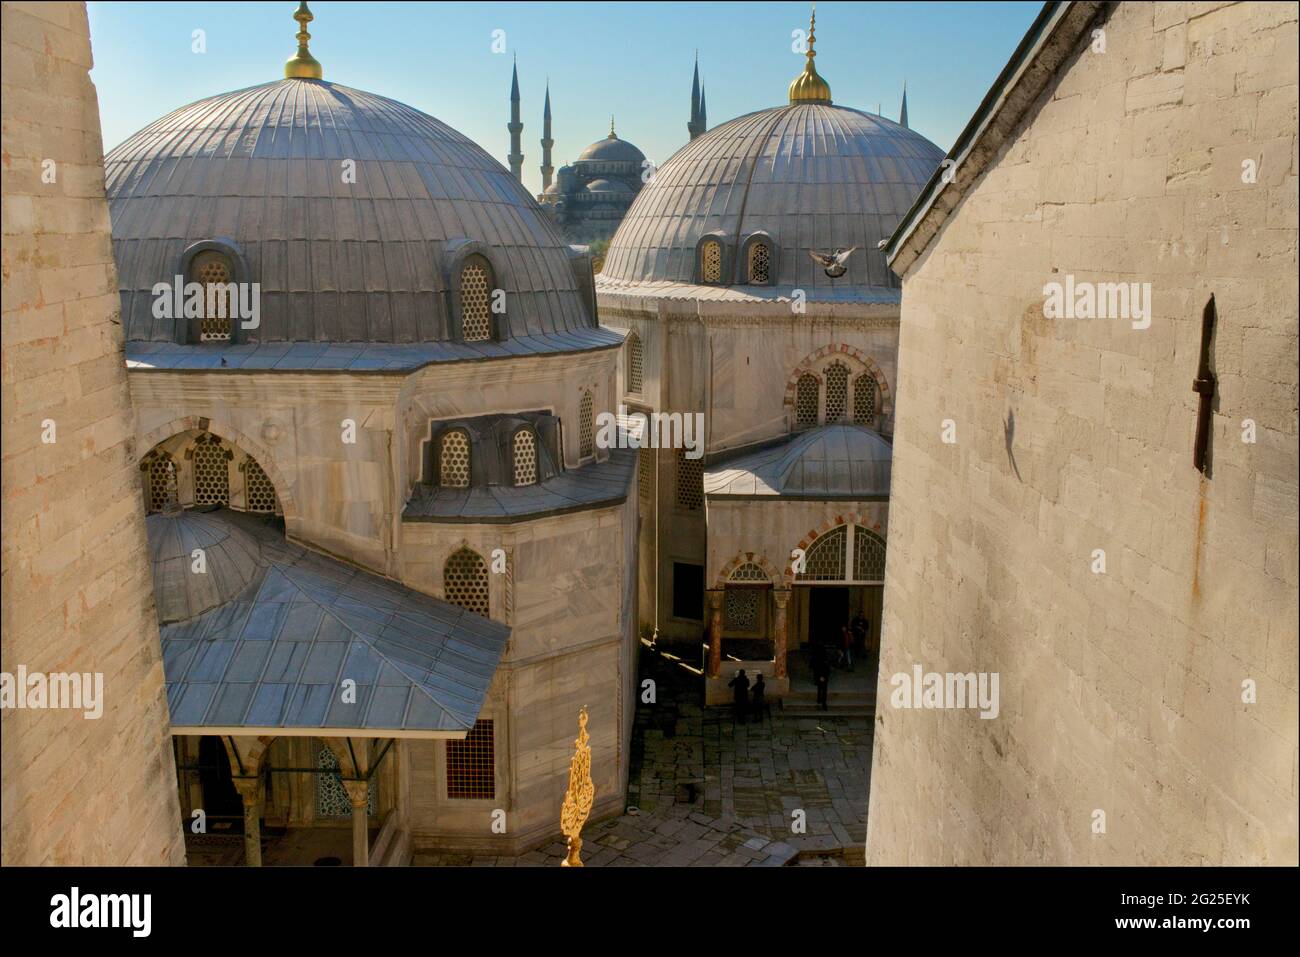 View of the Sultan Ahmed (Blue) Mosque on the horizon, viewed from a window of the Hagia Sophia (Turkish: Ayasofya), officially Ayasofya-i Kebir Cami-i ?erifi literally Holy Mosque of Hagia Sophia the Grand, and formerly the Church of Hagia Sophia. Istanbul, Turkey Stock Photo